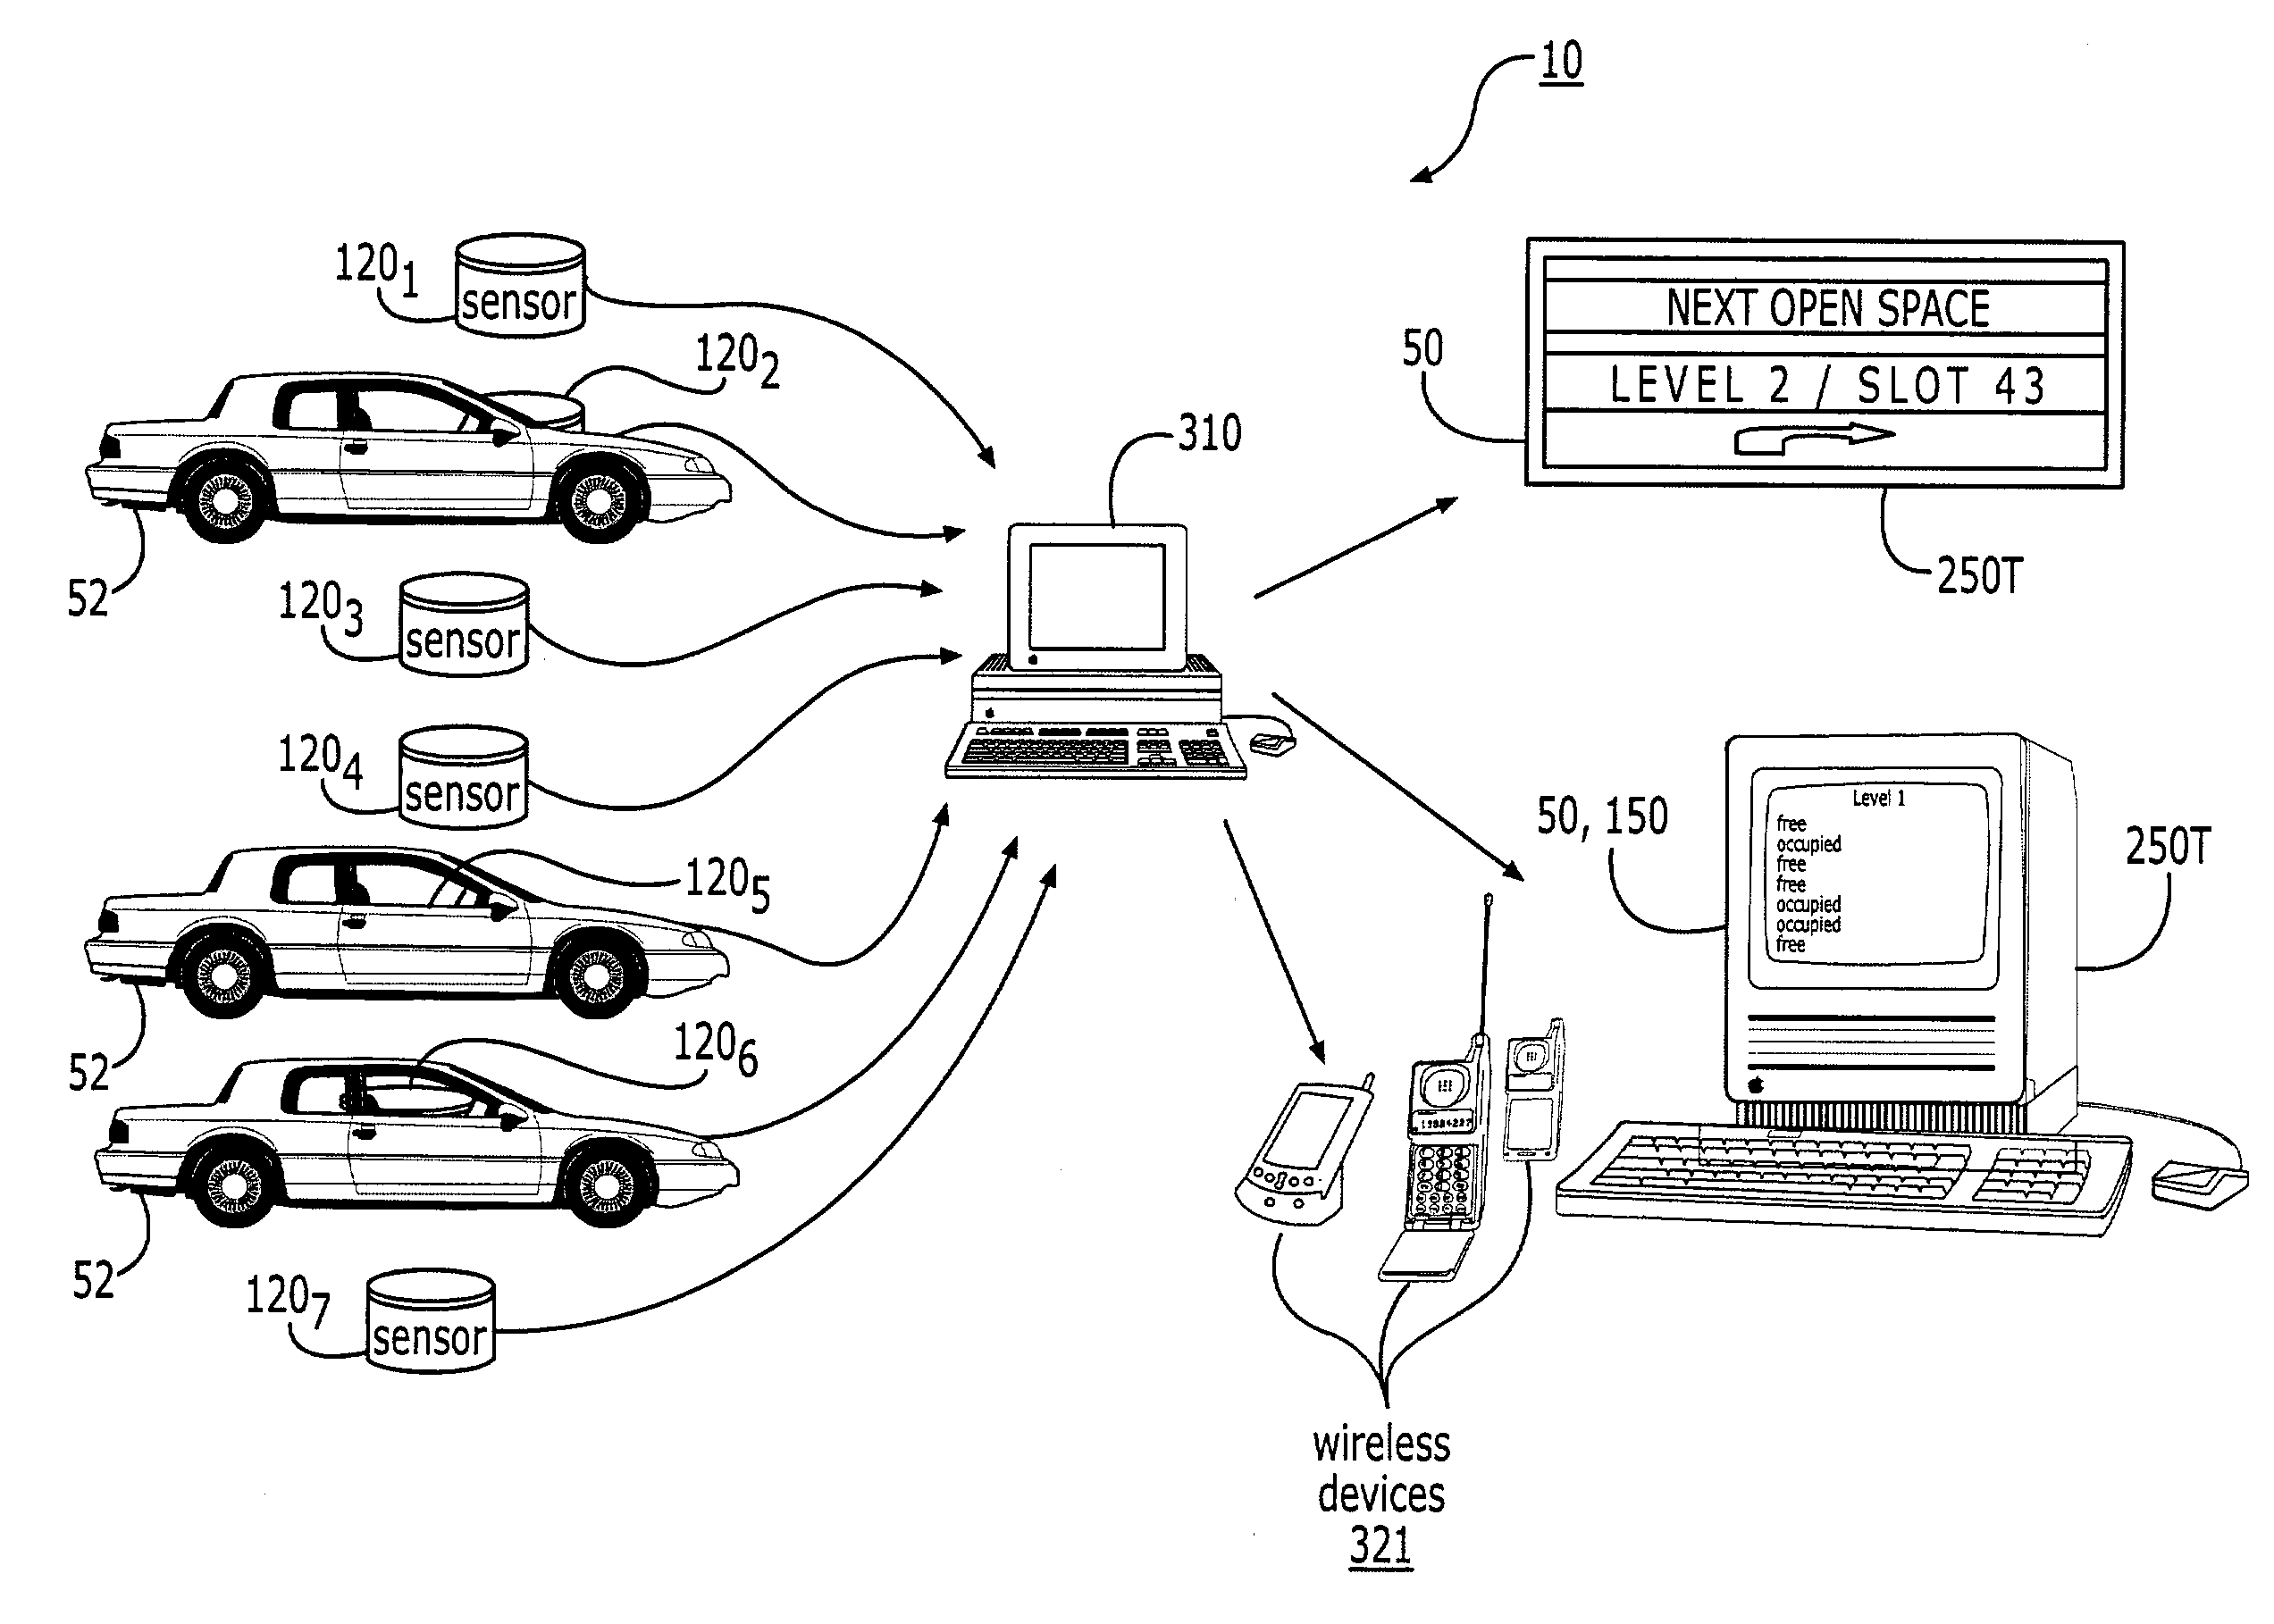 Automated parking director systems and related methods